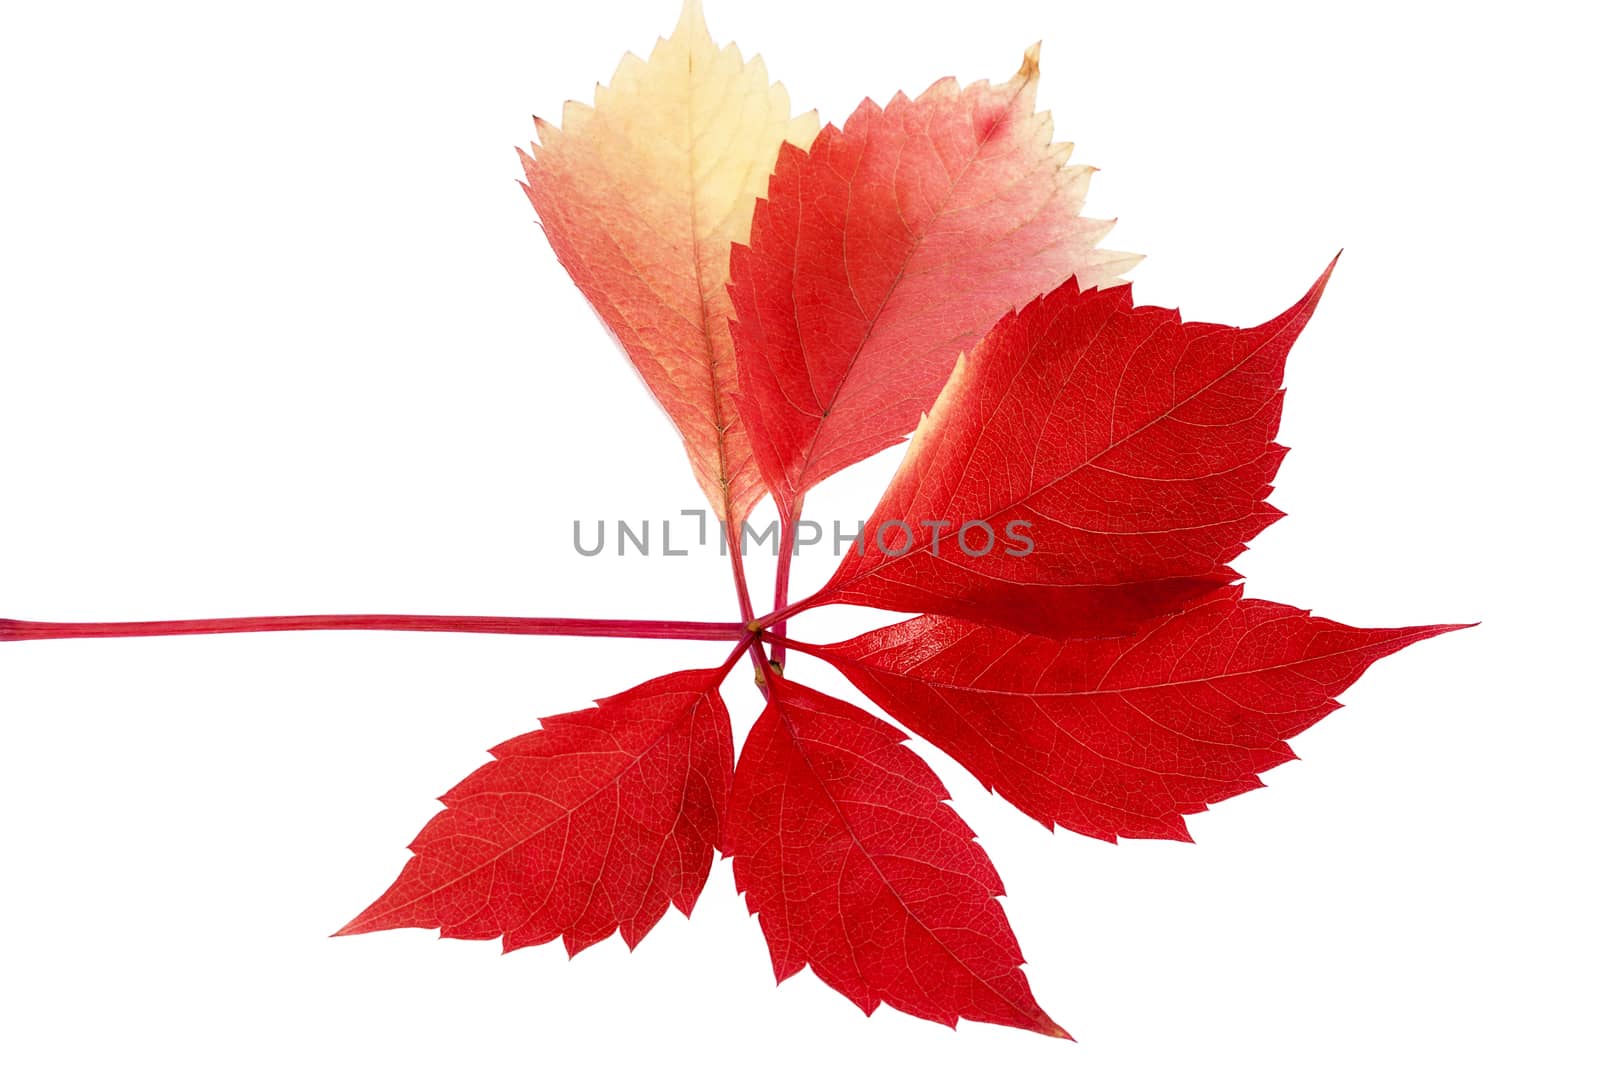 Leaf of parthenocissus in autumnal colors isolated on white background